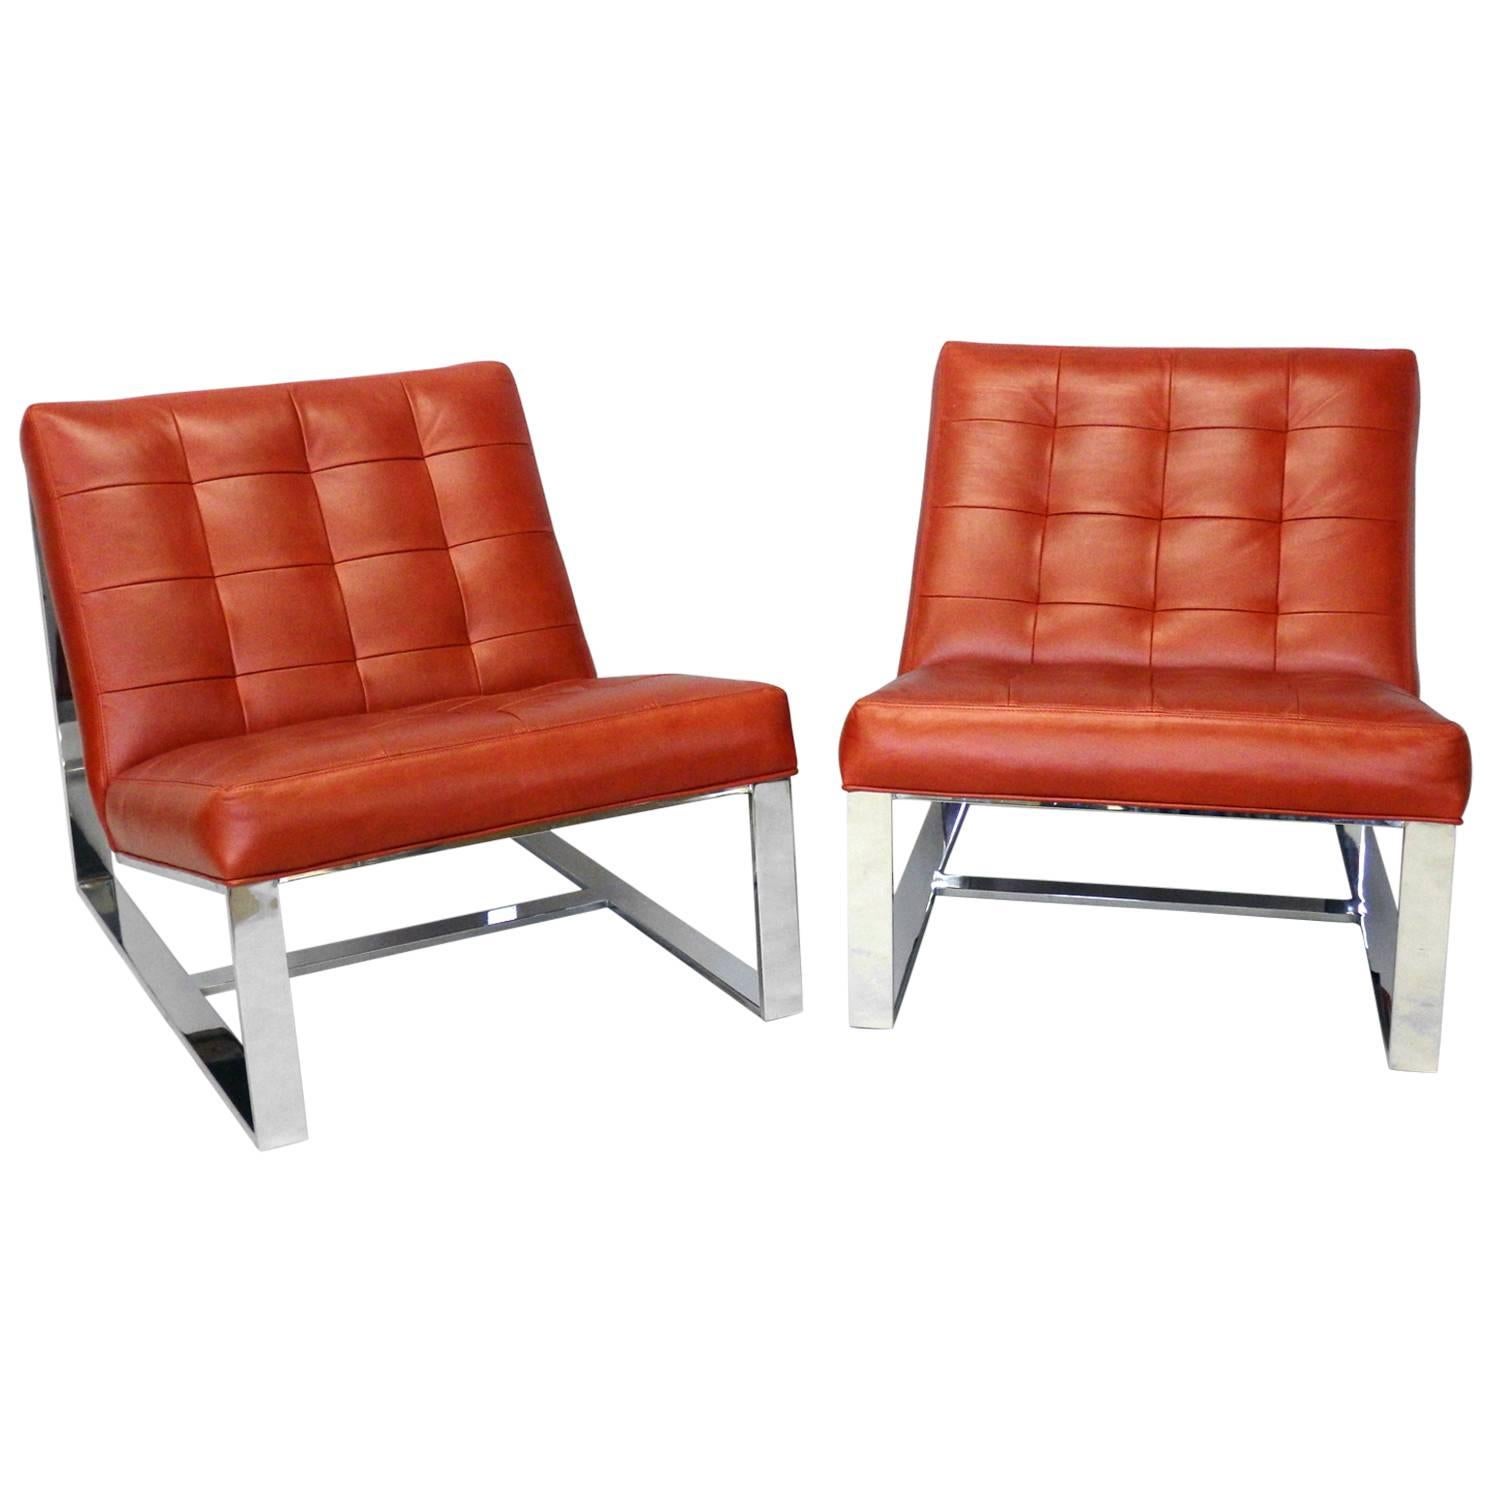 Pair of Milo Baughman Red Leather Armless Lounge Chairs For Sale